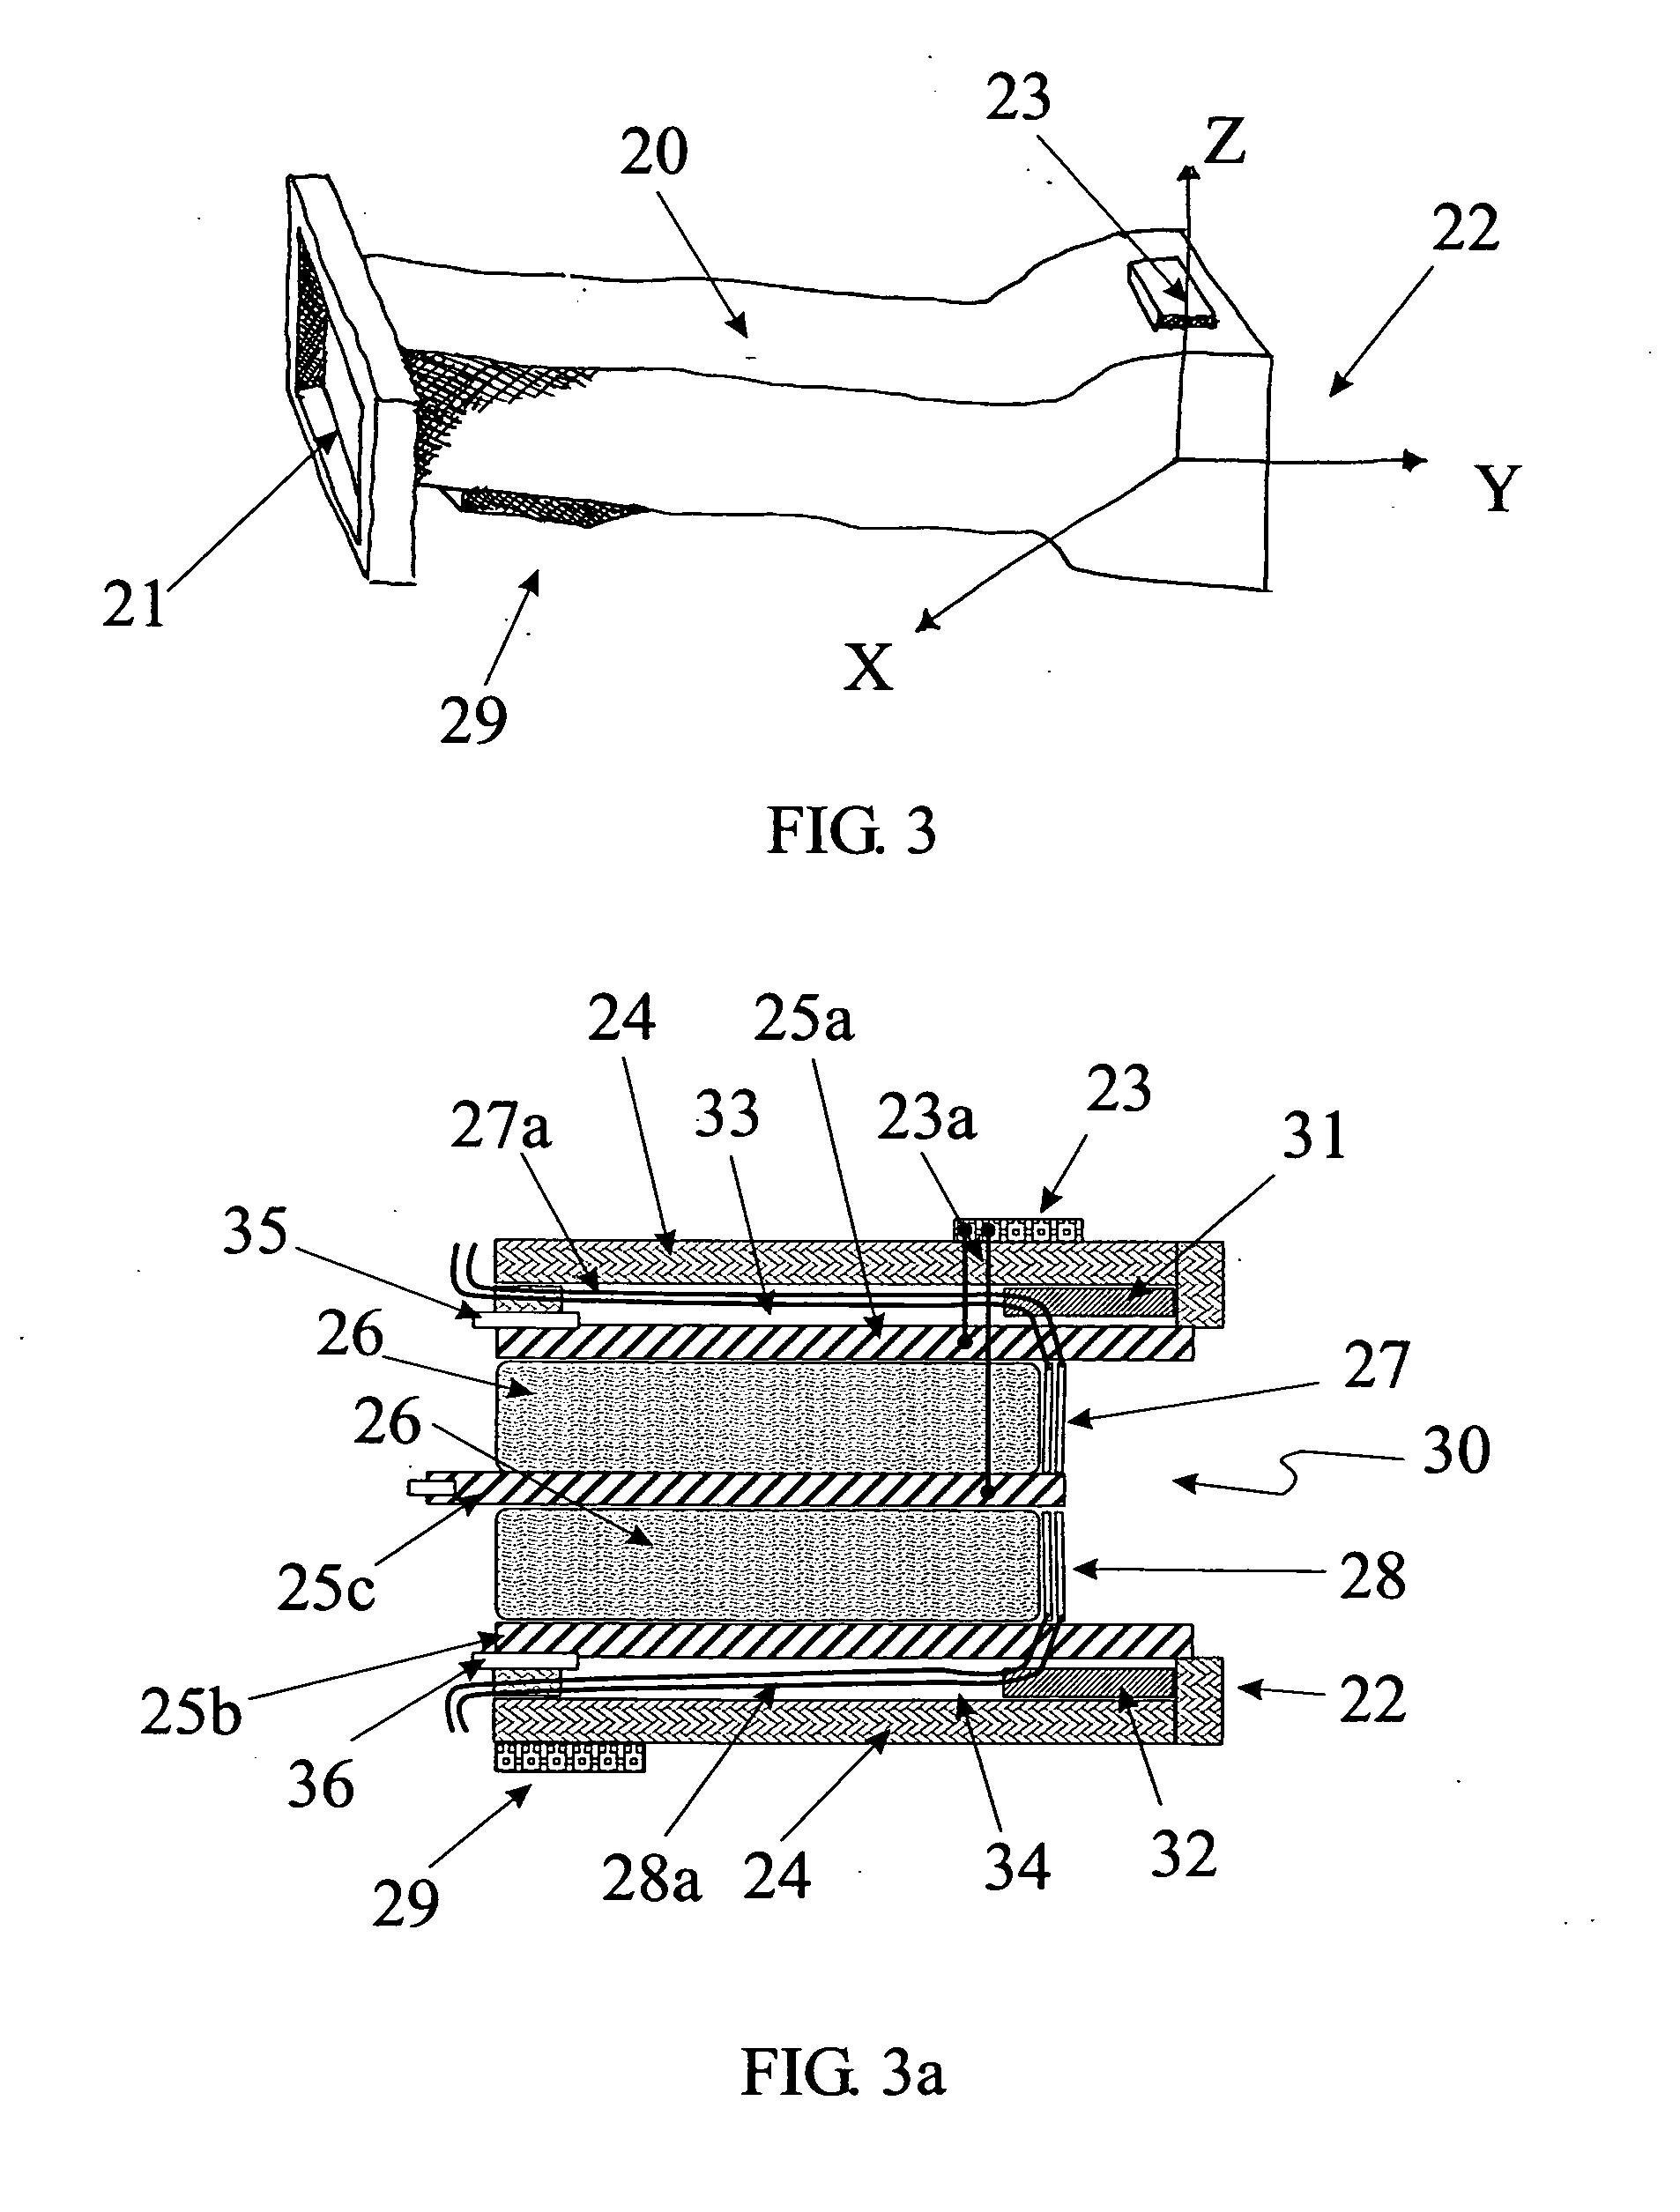 Method and apparatus for examining a substance, particularly tissue, to characterize its type